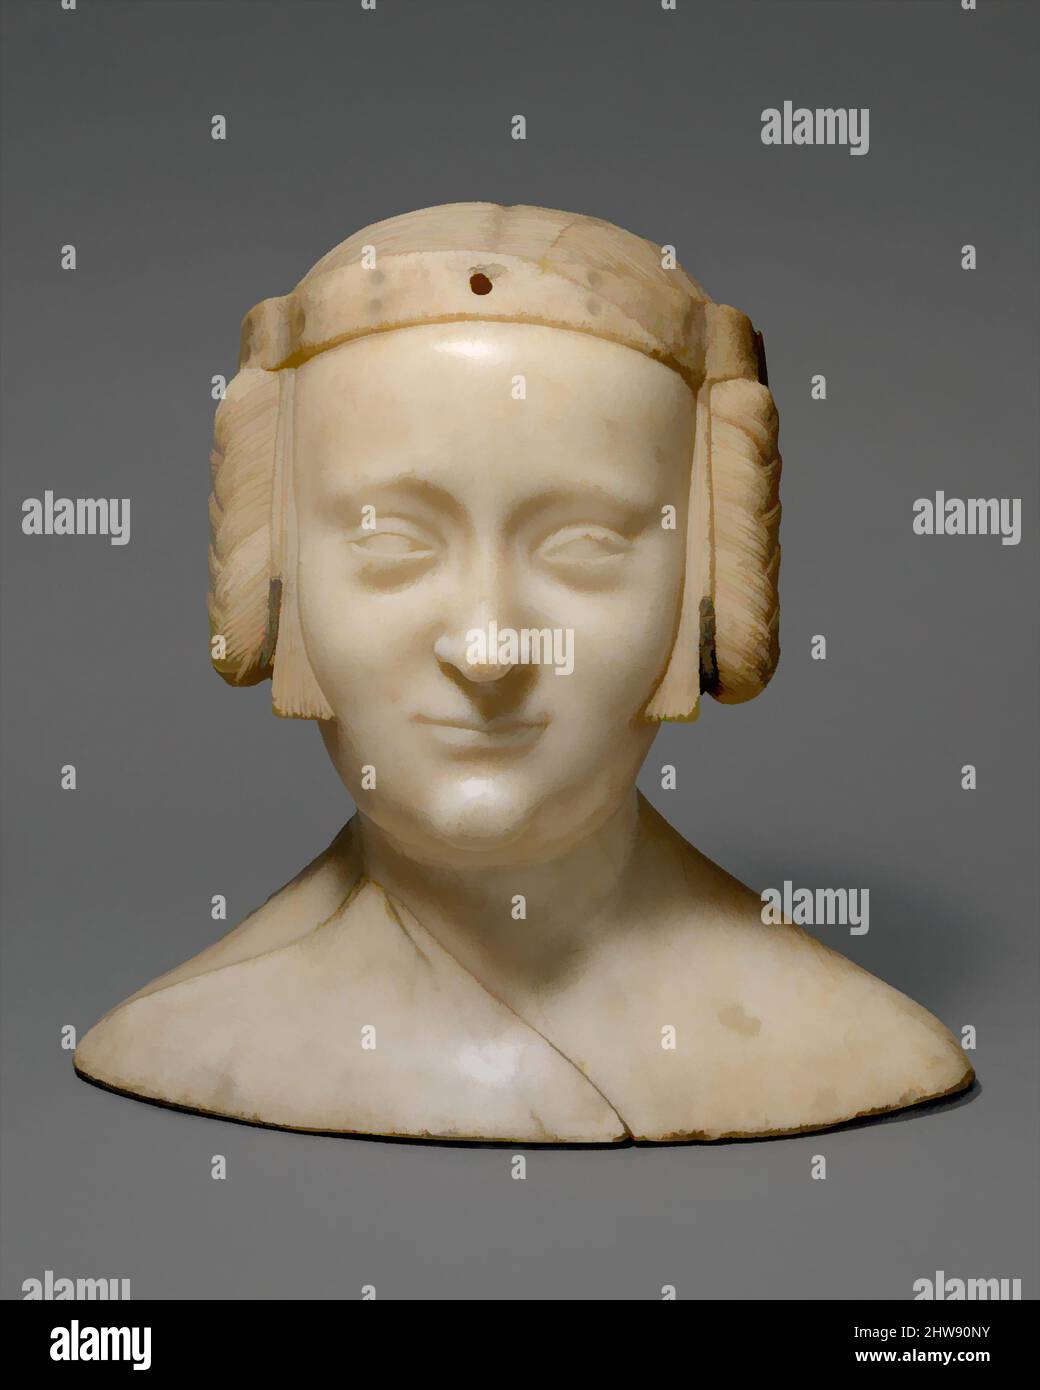 Art inspired by Tomb Effigy Bust of Marie de France (1327-41), daughter of Charles IV of France and Jeanne d'Evreux, ca. 1381, Made in Île de France, French, Marble with lead inlays, Overall (without base): 12 1/4 x 12 3/4 x 6 3/16 in. (31.1 x 32.4 x 15.7 cm), Sculpture-Stone, Jean de, Classic works modernized by Artotop with a splash of modernity. Shapes, color and value, eye-catching visual impact on art. Emotions through freedom of artworks in a contemporary way. A timeless message pursuing a wildly creative new direction. Artists turning to the digital medium and creating the Artotop NFT Stock Photo